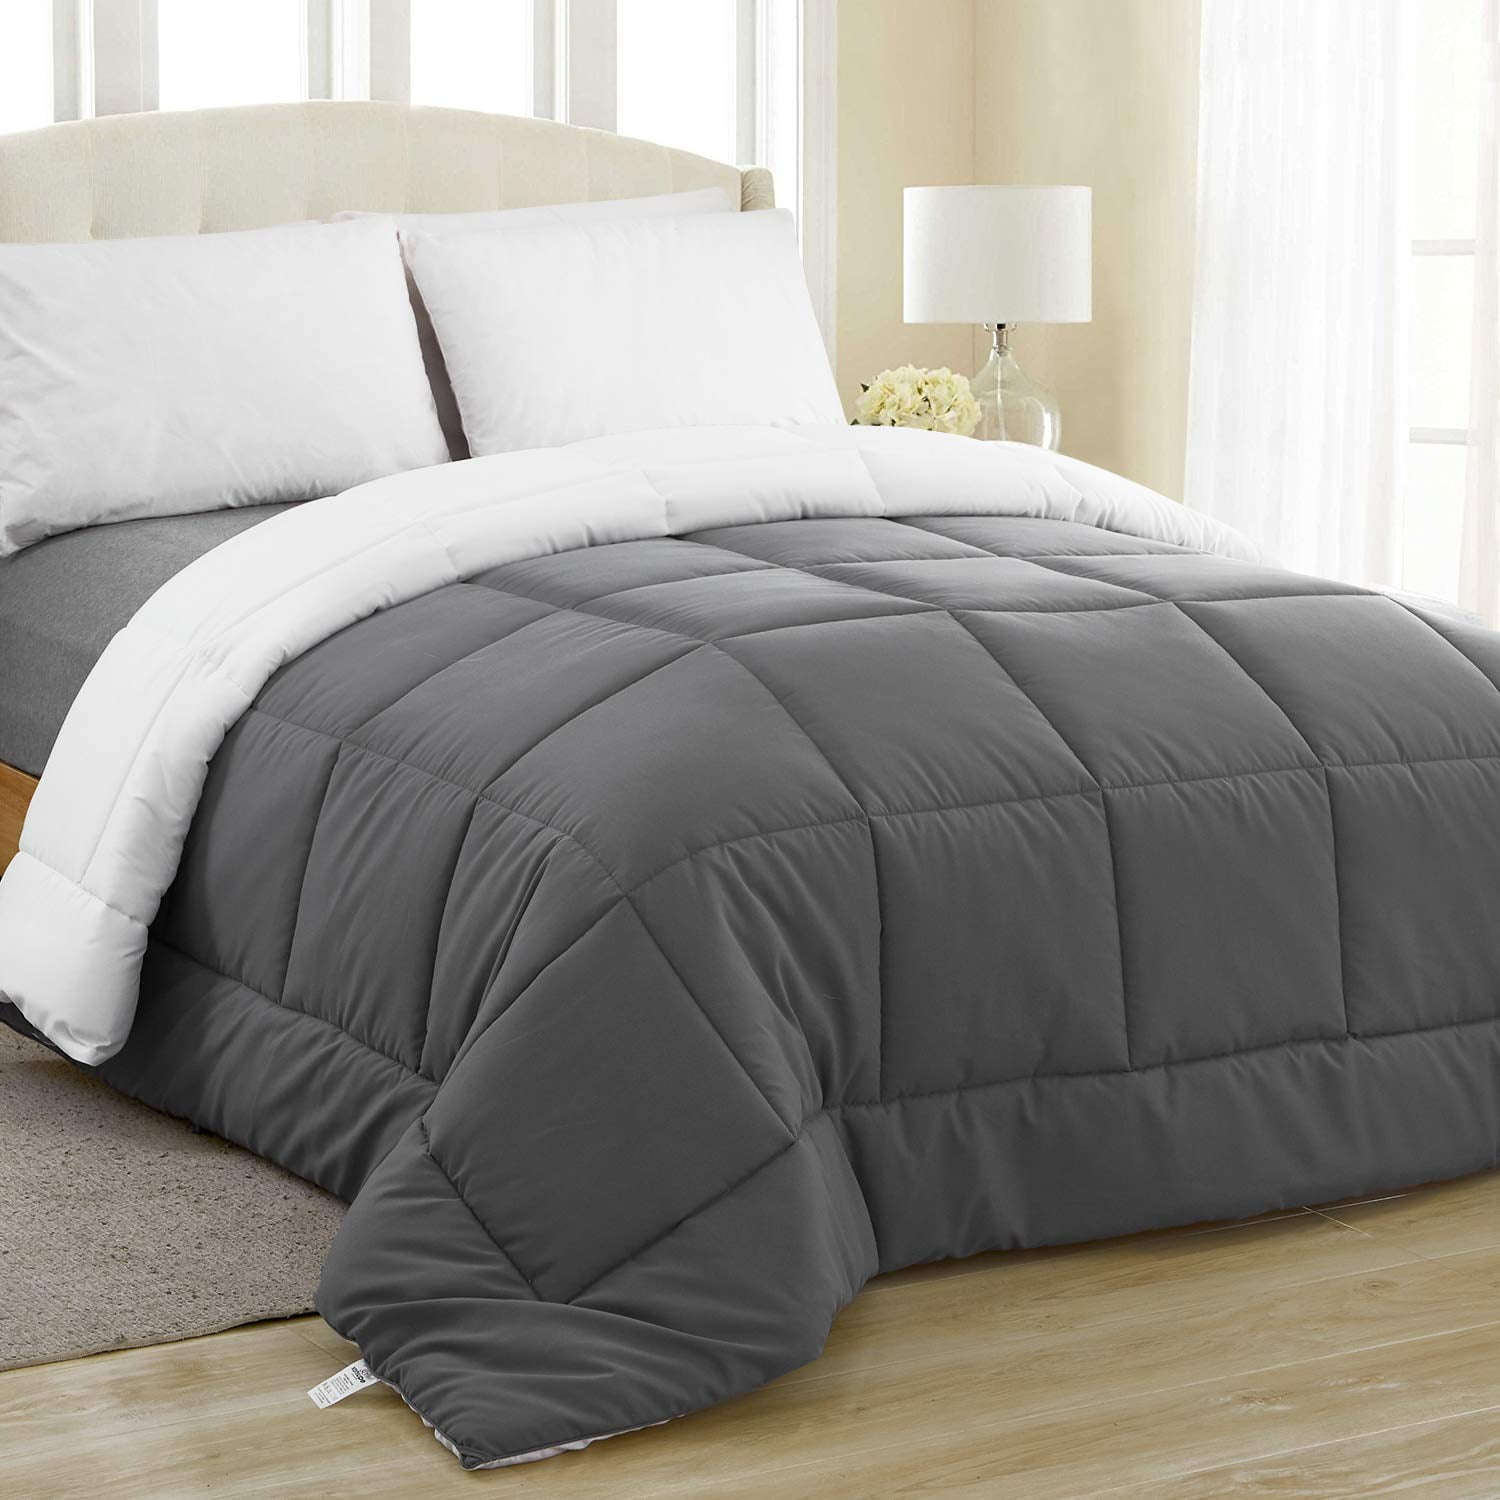 Equinox AllSeason Charcoal Grey/White Quilted Comforter